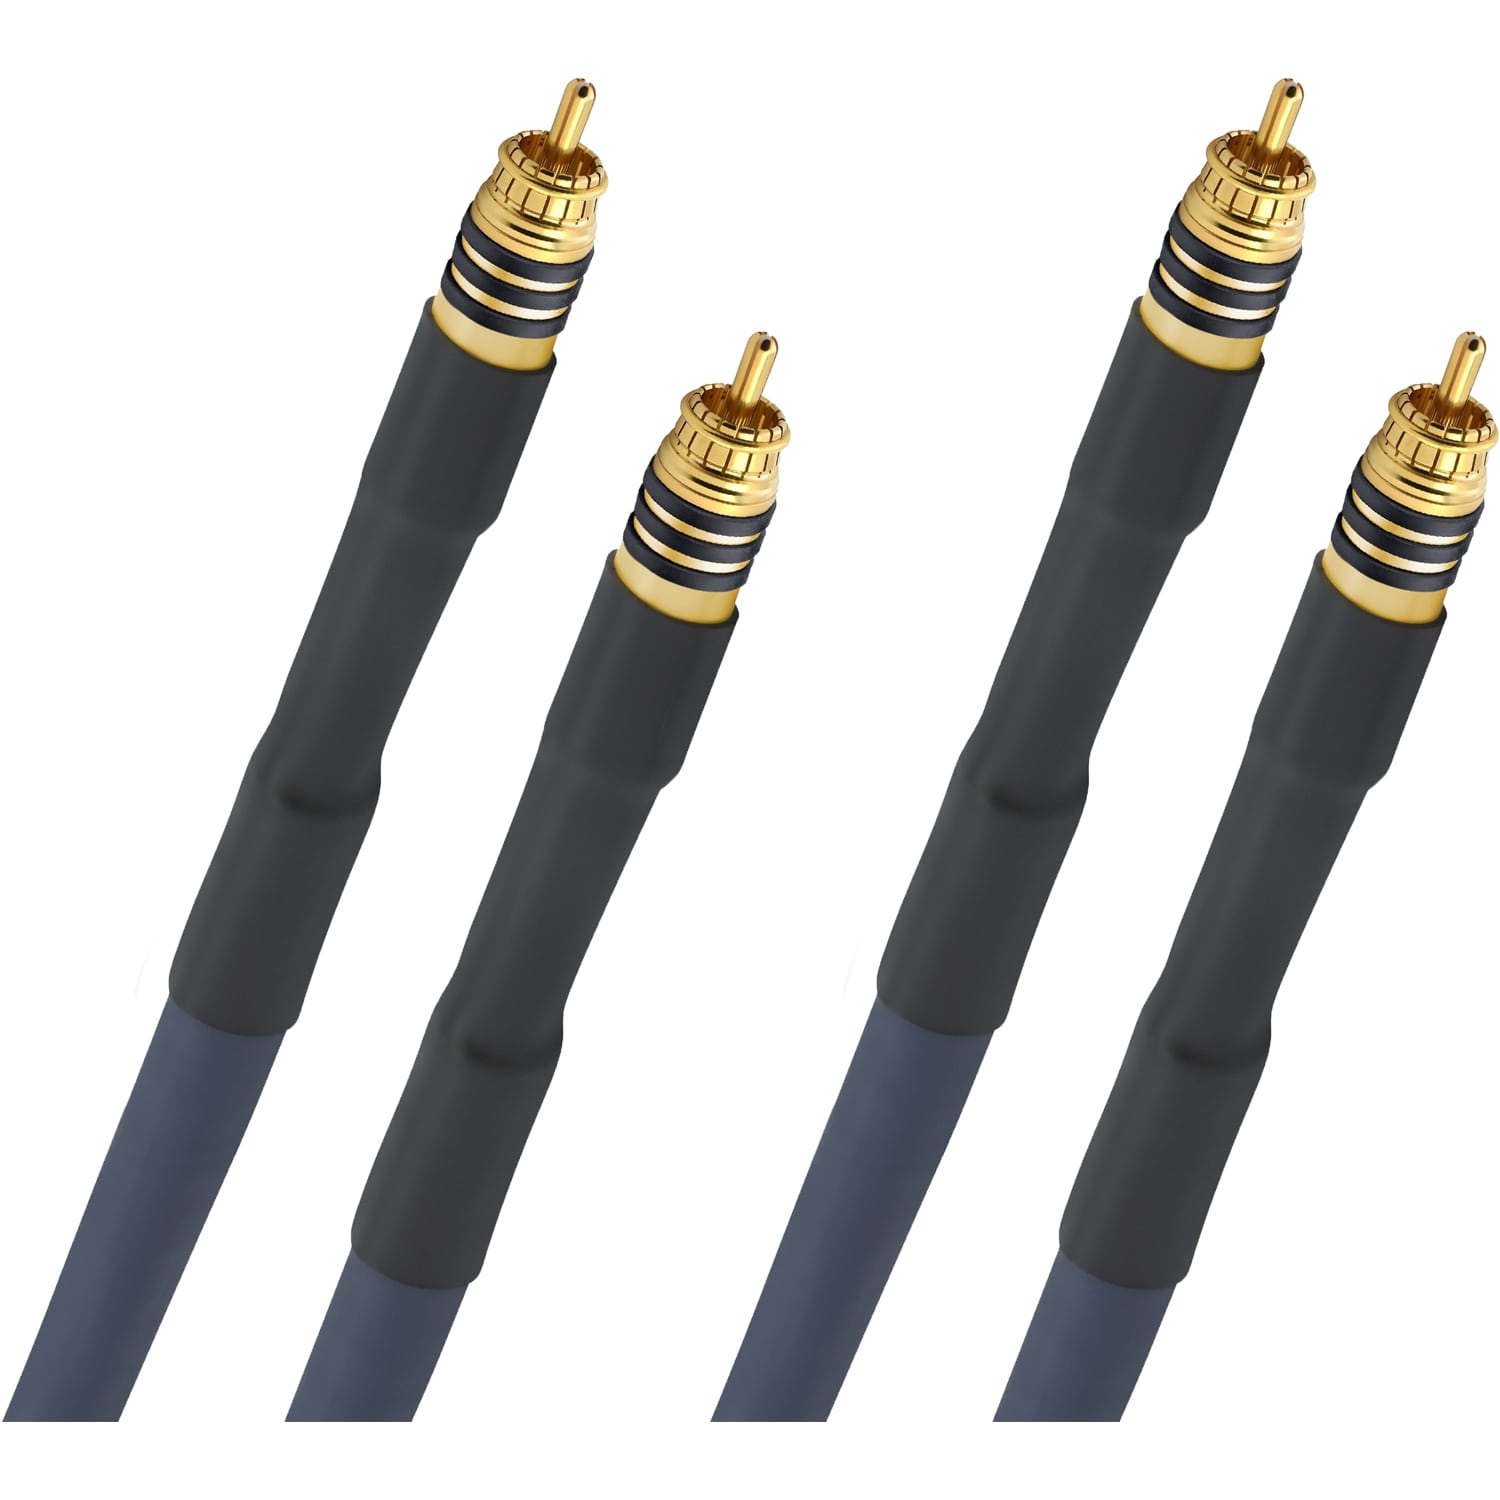 Кабели межблочные аудио Oehlbach STATE OF THE ART XXL Cable RCA, 2x2,00m, gold, D1C13116 силовые кабели oehlbach state of the art xxl powercord 3m d1c13062